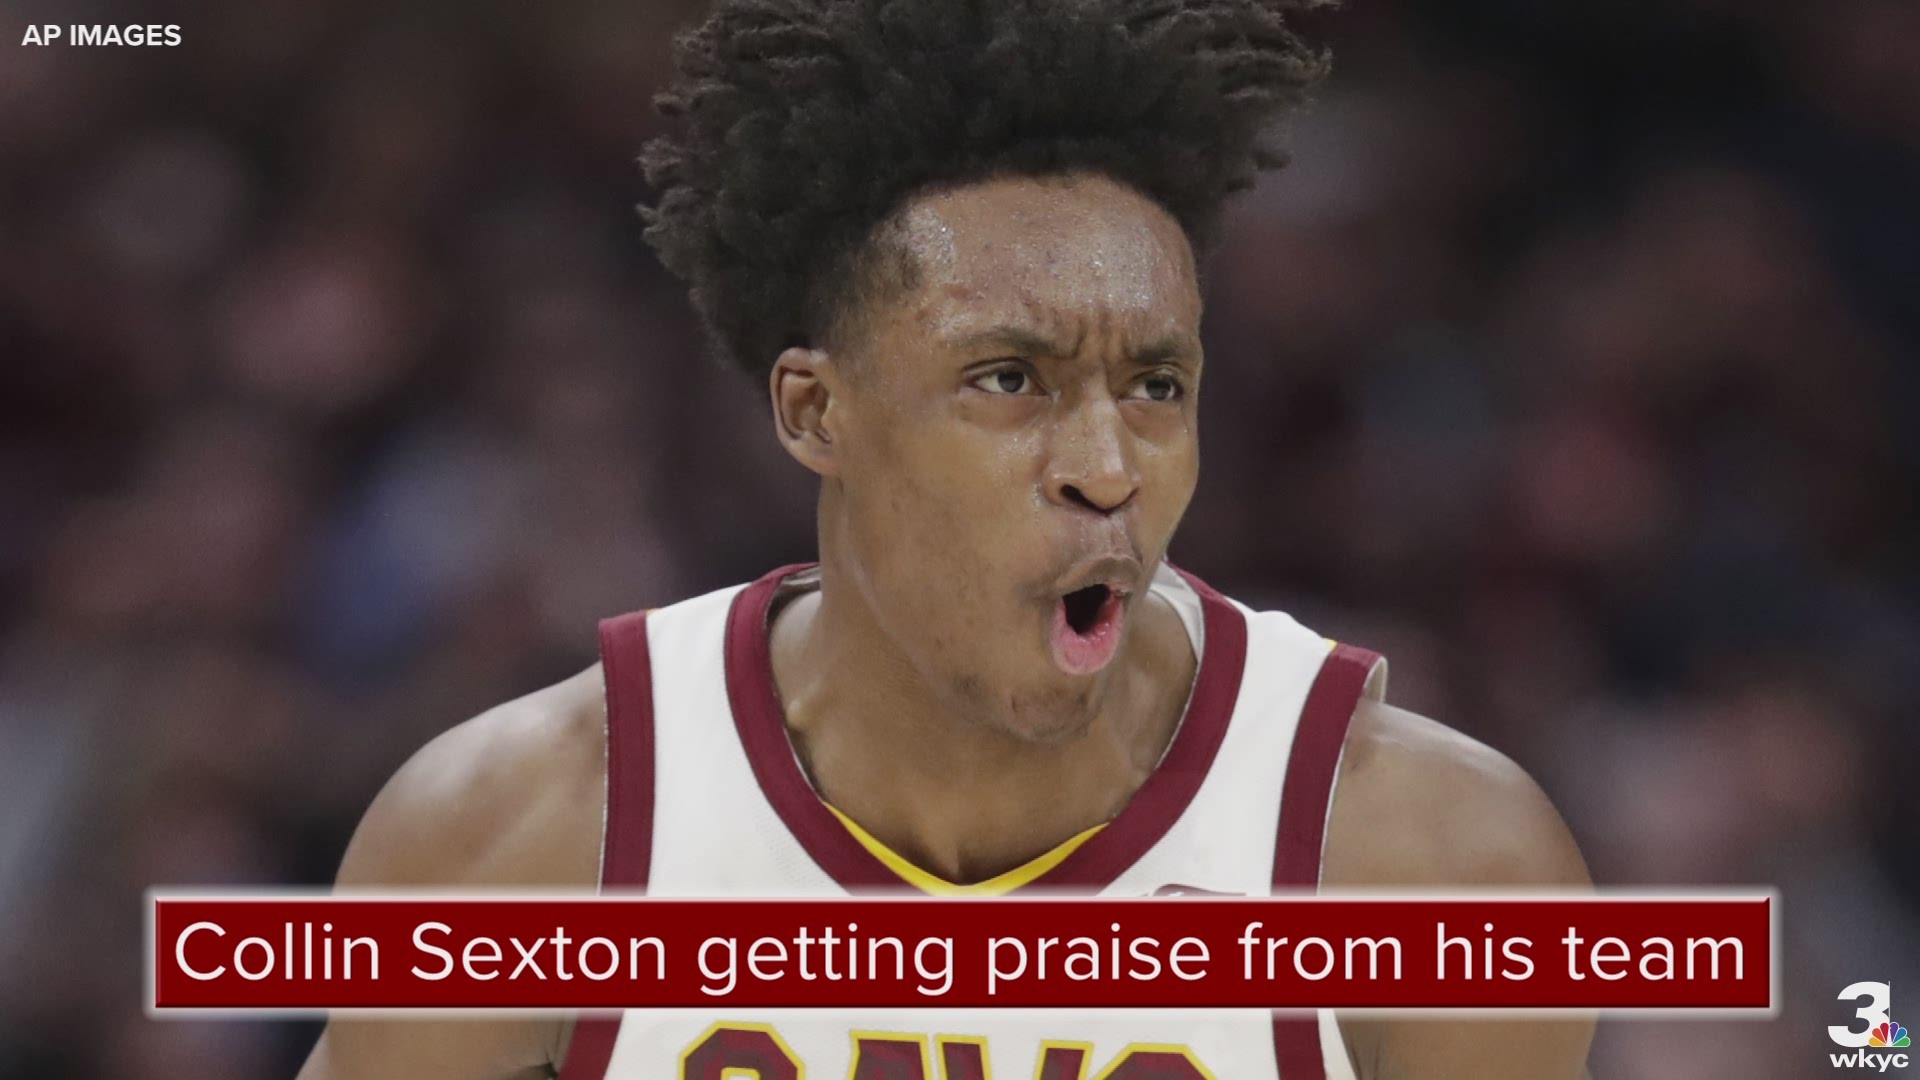 Veteran center Tristan Thompson says point guard Collin Sexton is taking steps in the right direction as a playmaker for the Cleveland Cavaliers.